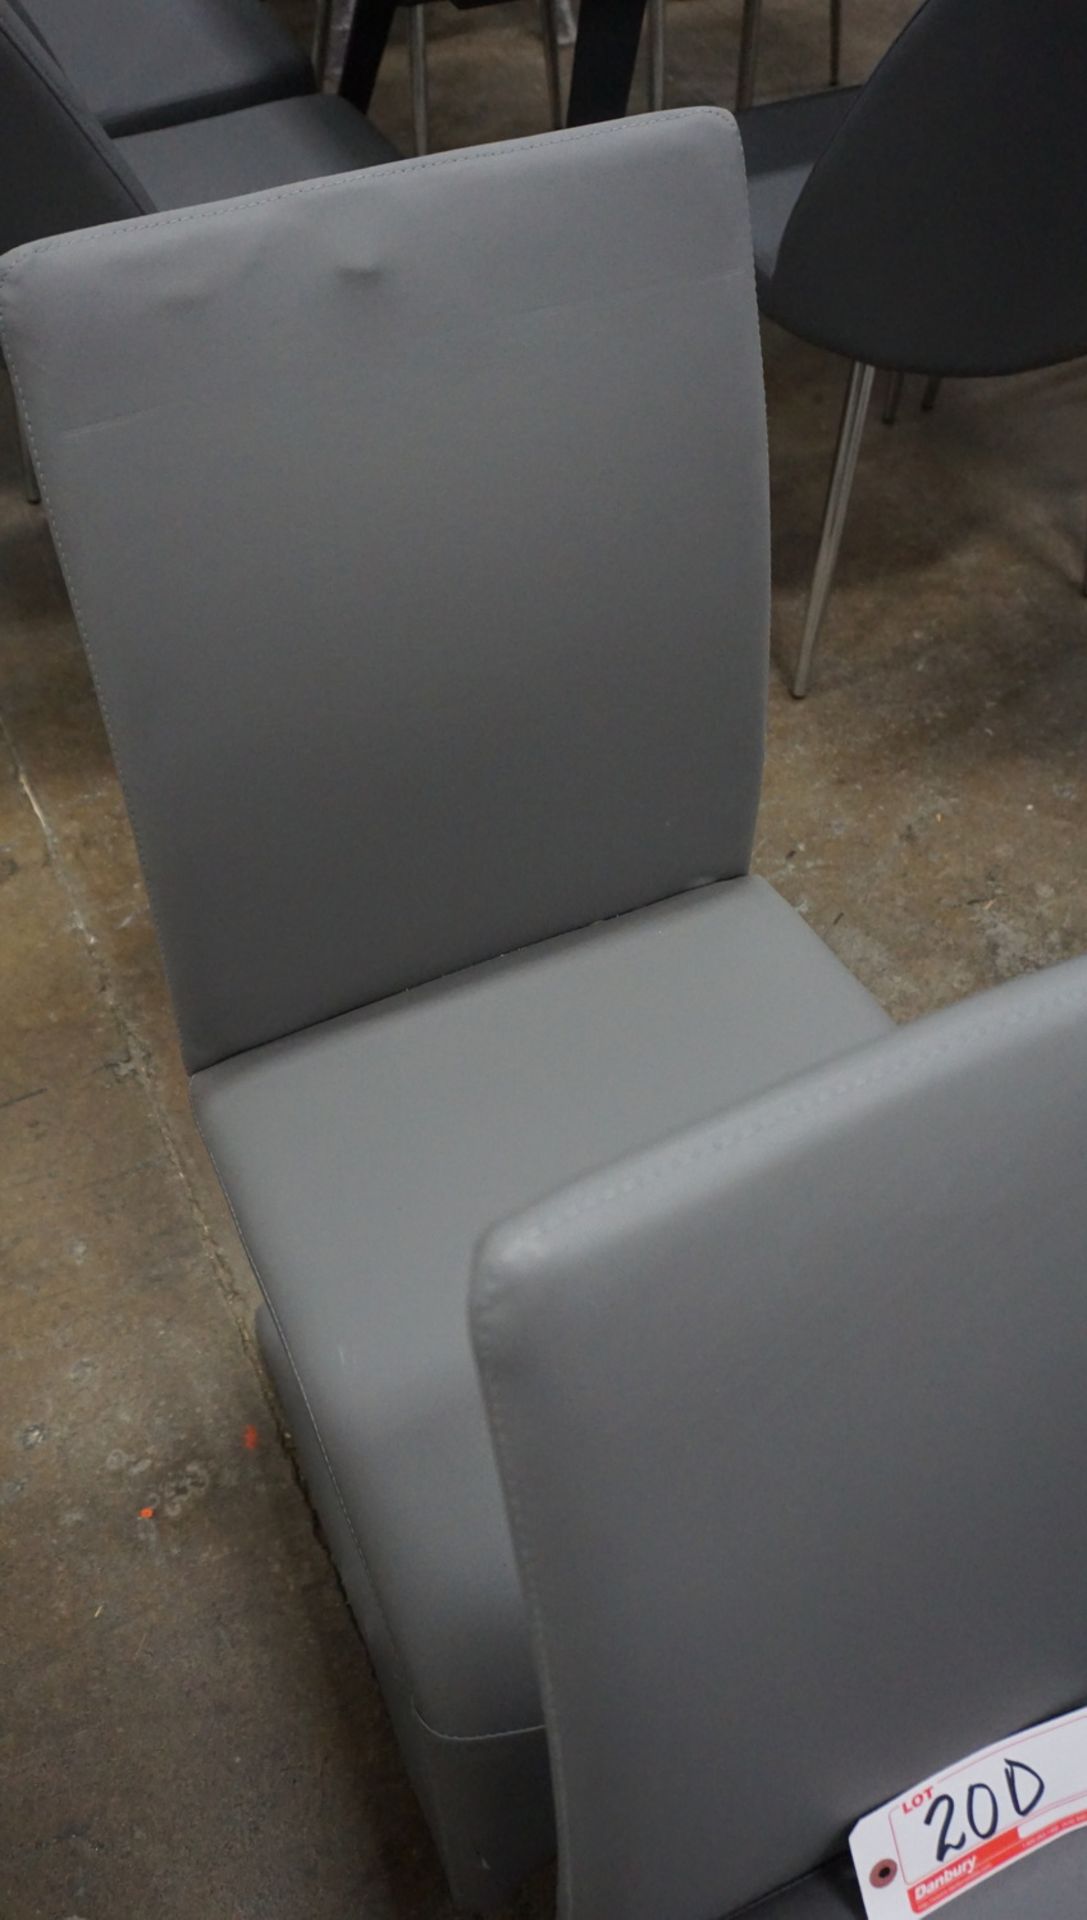 UNITS - GREY PU LEATHER DINING CHAIRS - Image 2 of 2